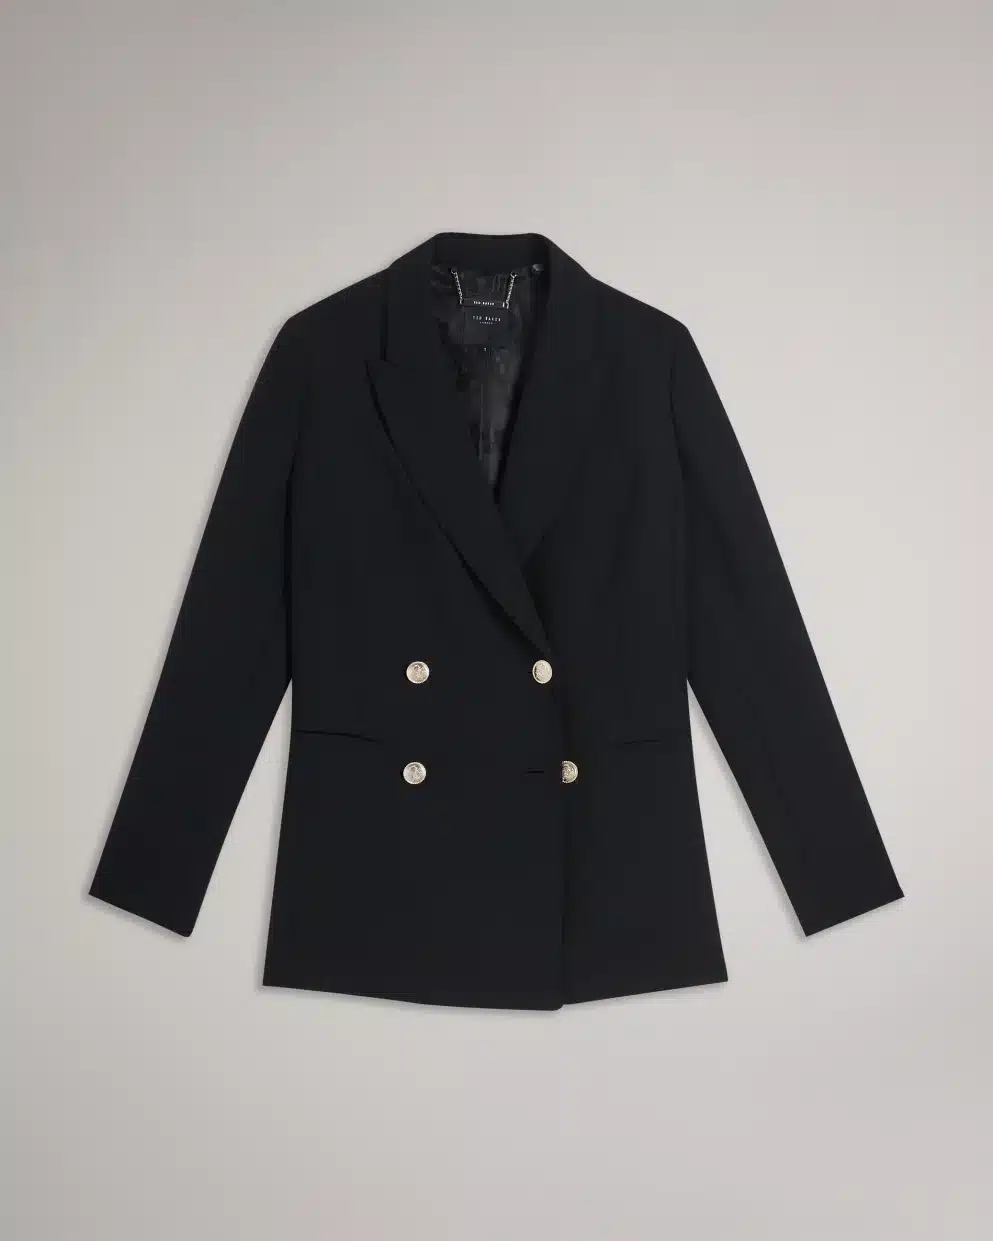 Ted Baker Black Llayladouble Breasted Jacket